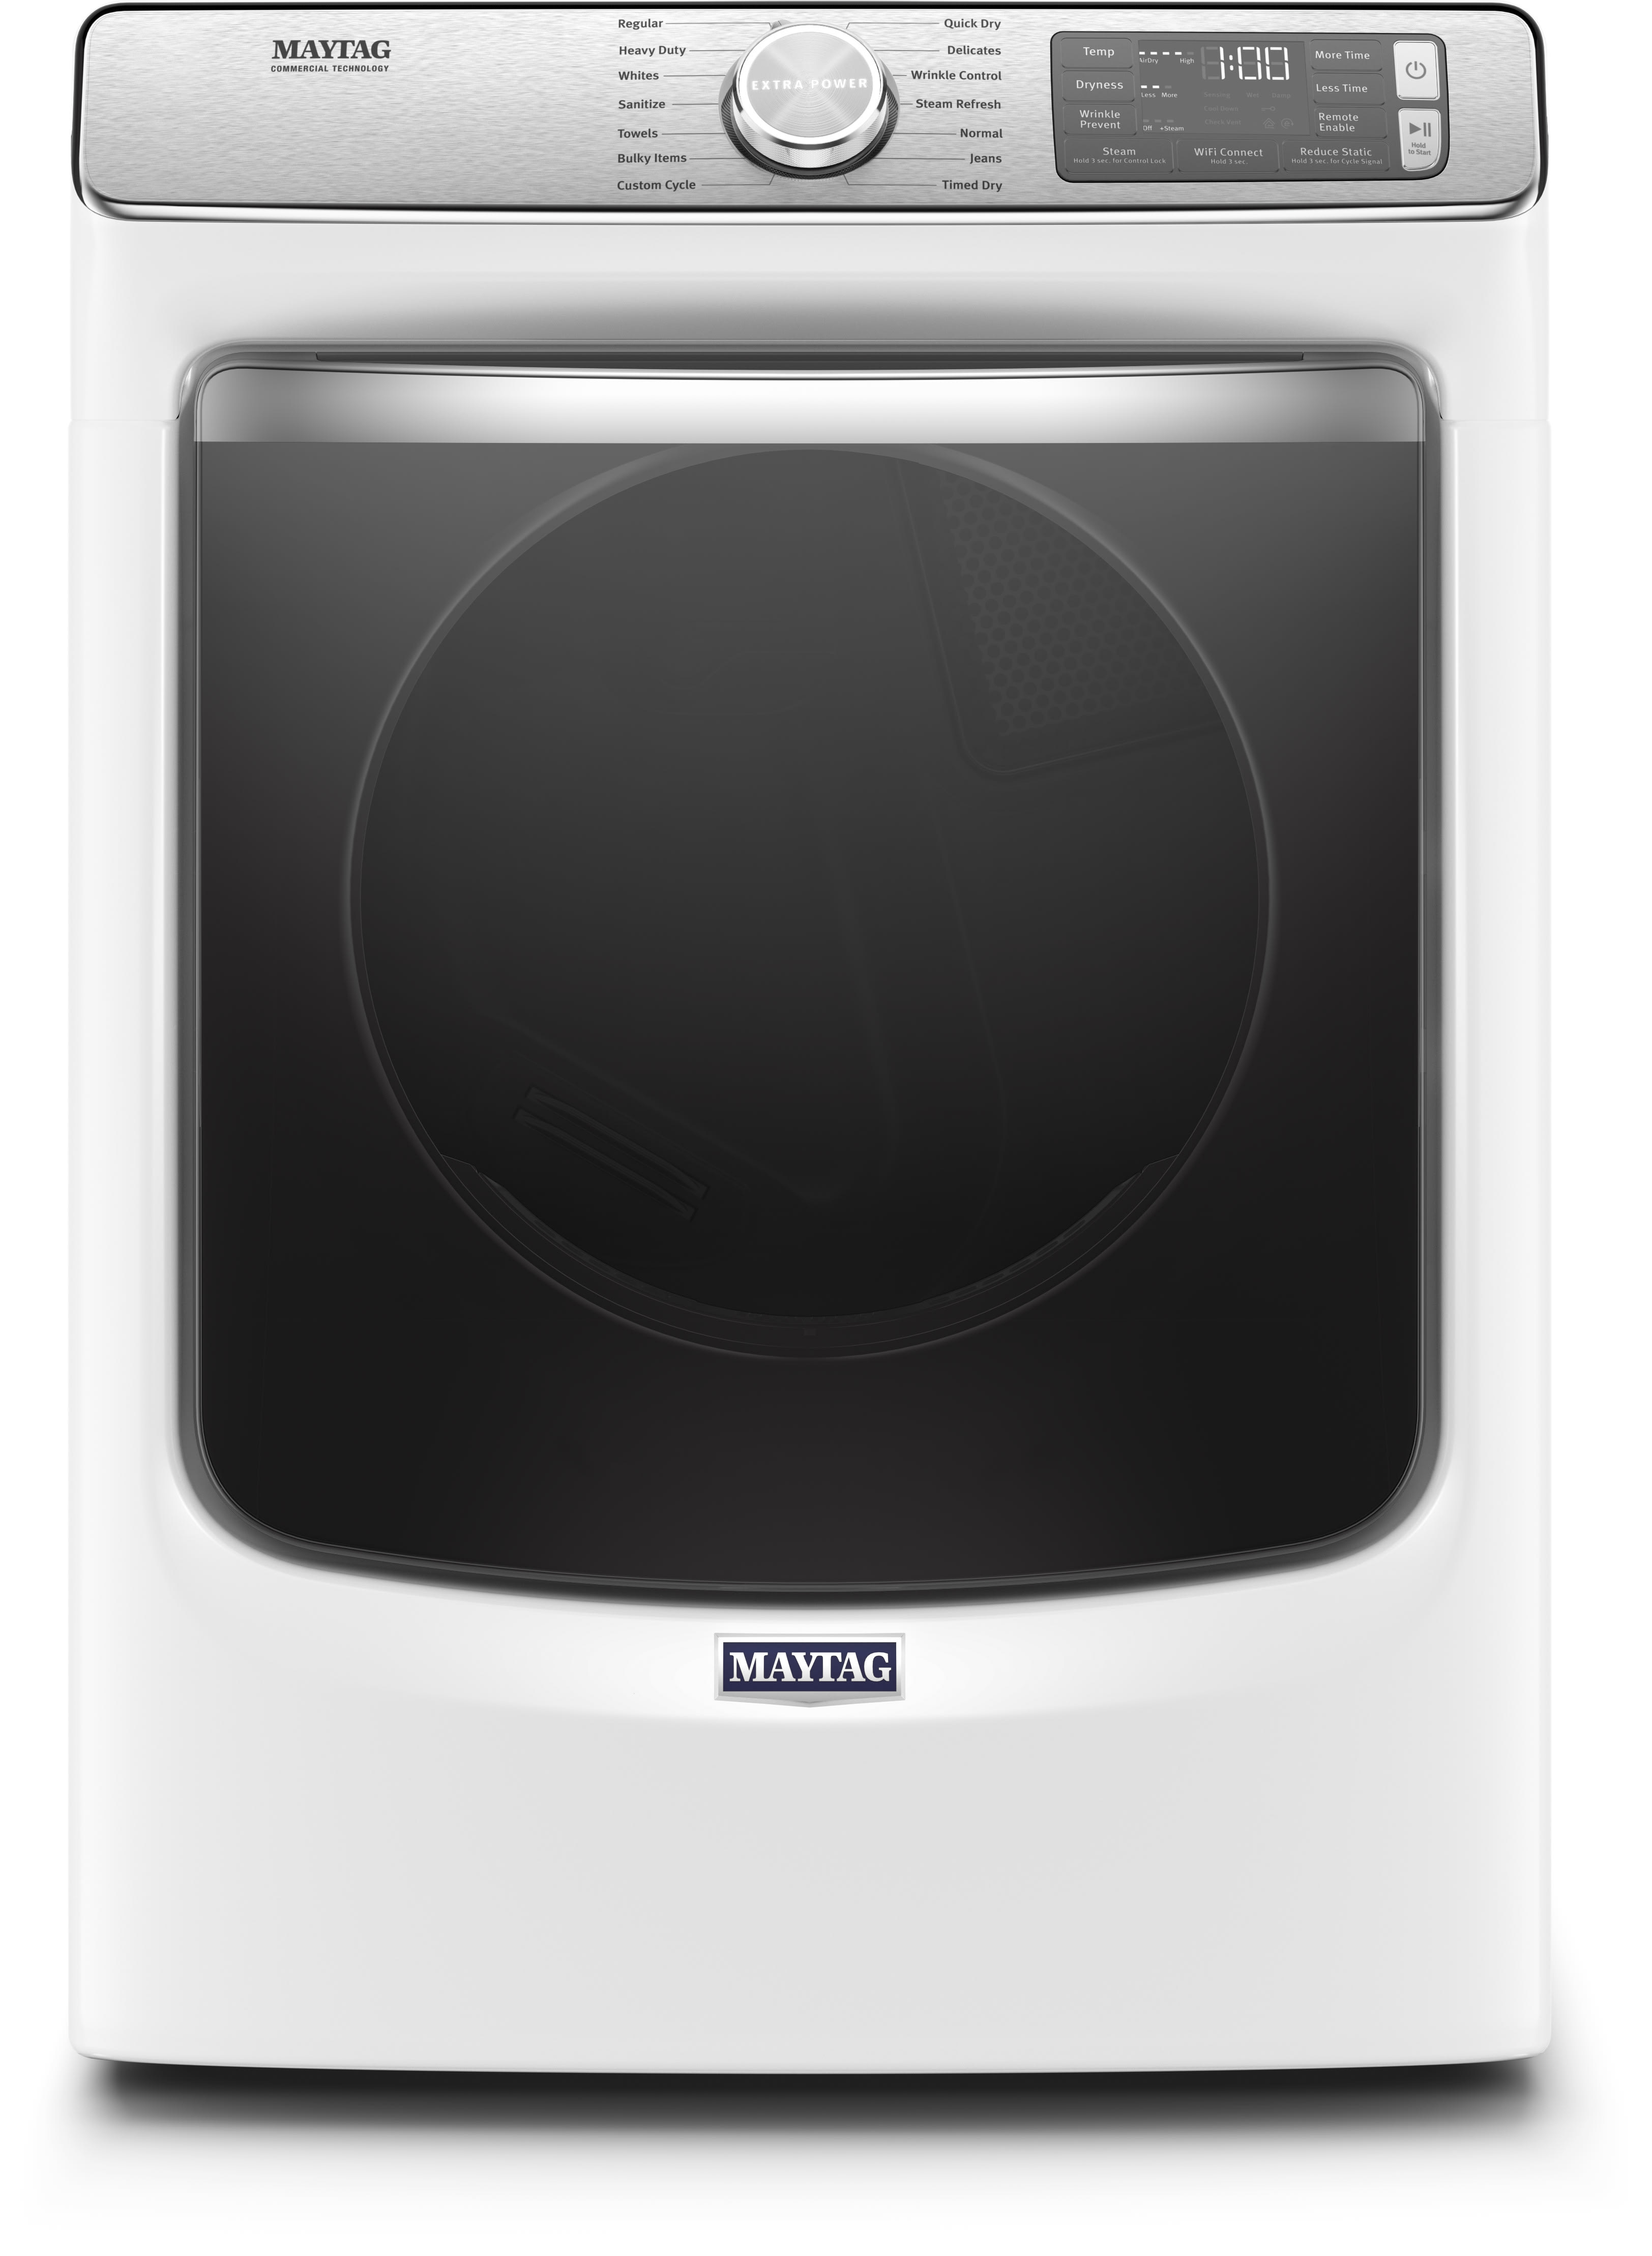 Maytag Mhw8000aw 27 Inch 4 3 Cu Ft Front Load Washer With 11 Wash Cycles 1 400 Rpm Intellitemp Powerwash Cycle Allergen Cycle Advanced Vibration Control Plus And Energy Star Certification White